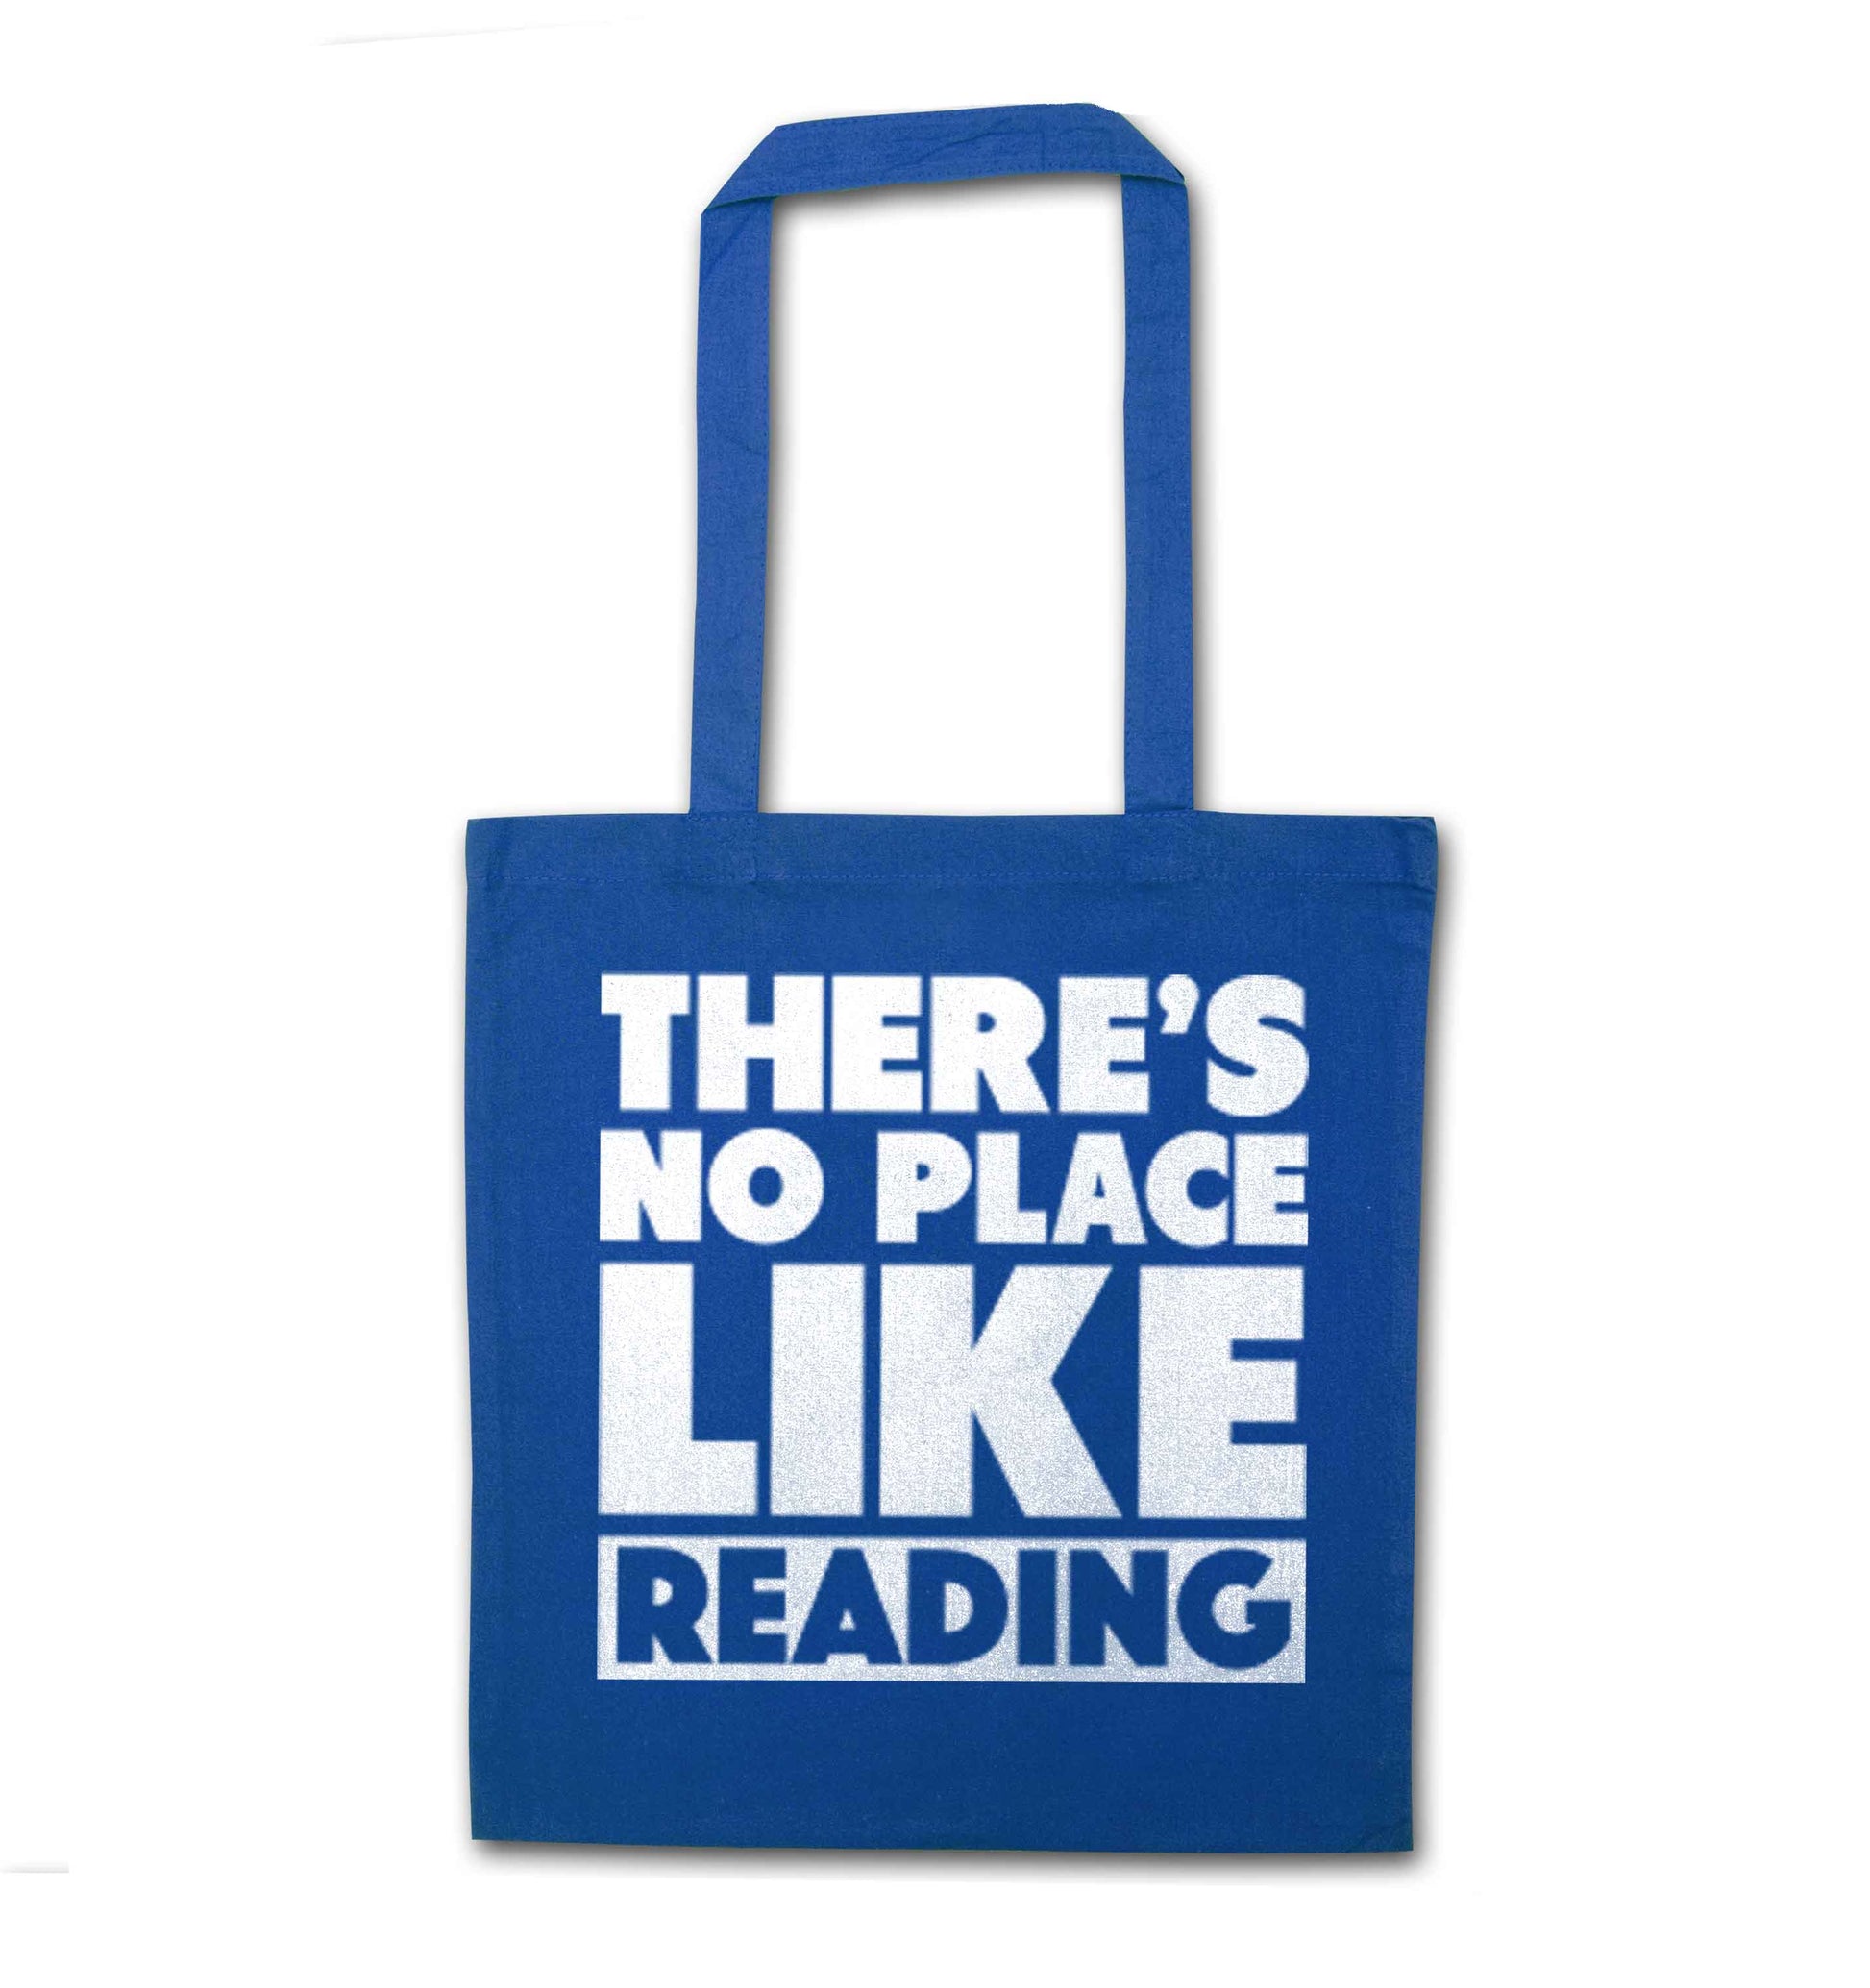 There's no place like Readingblue tote bag